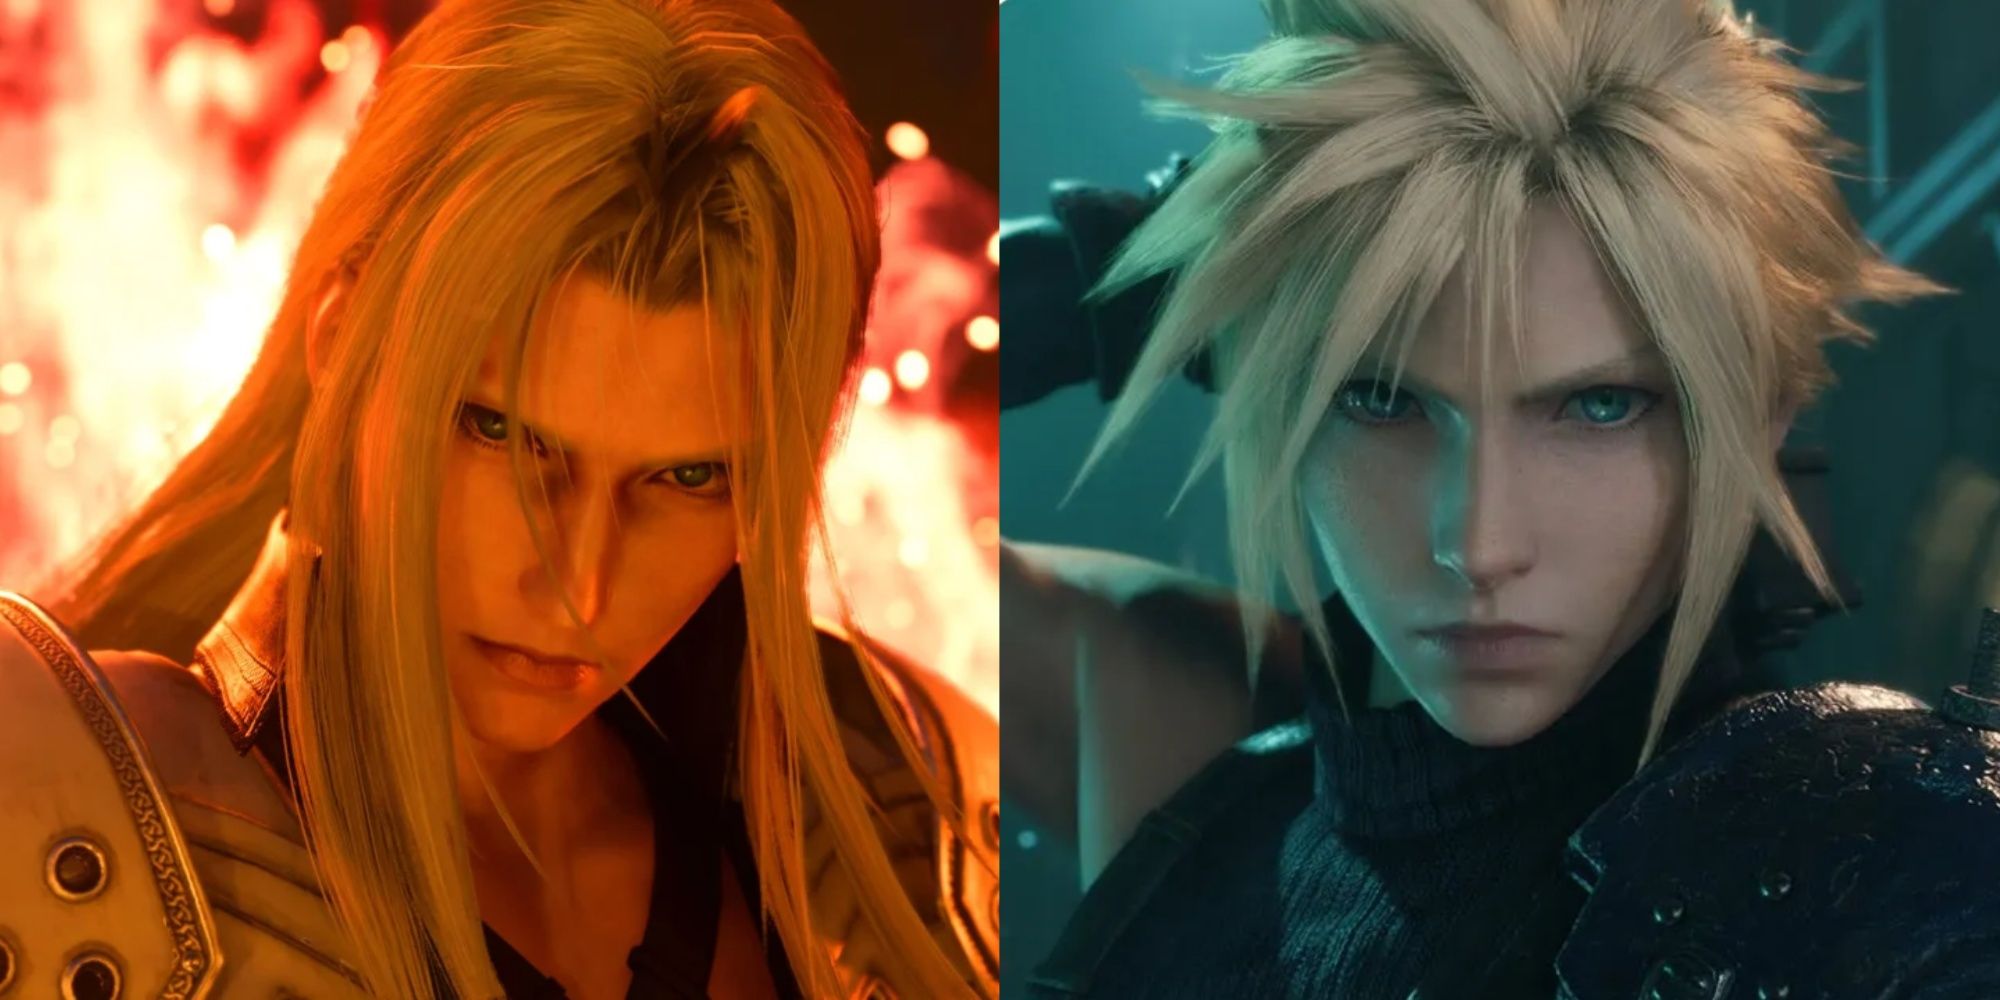 sephiroth and cloud in final fantasy 7 remake and rebirth